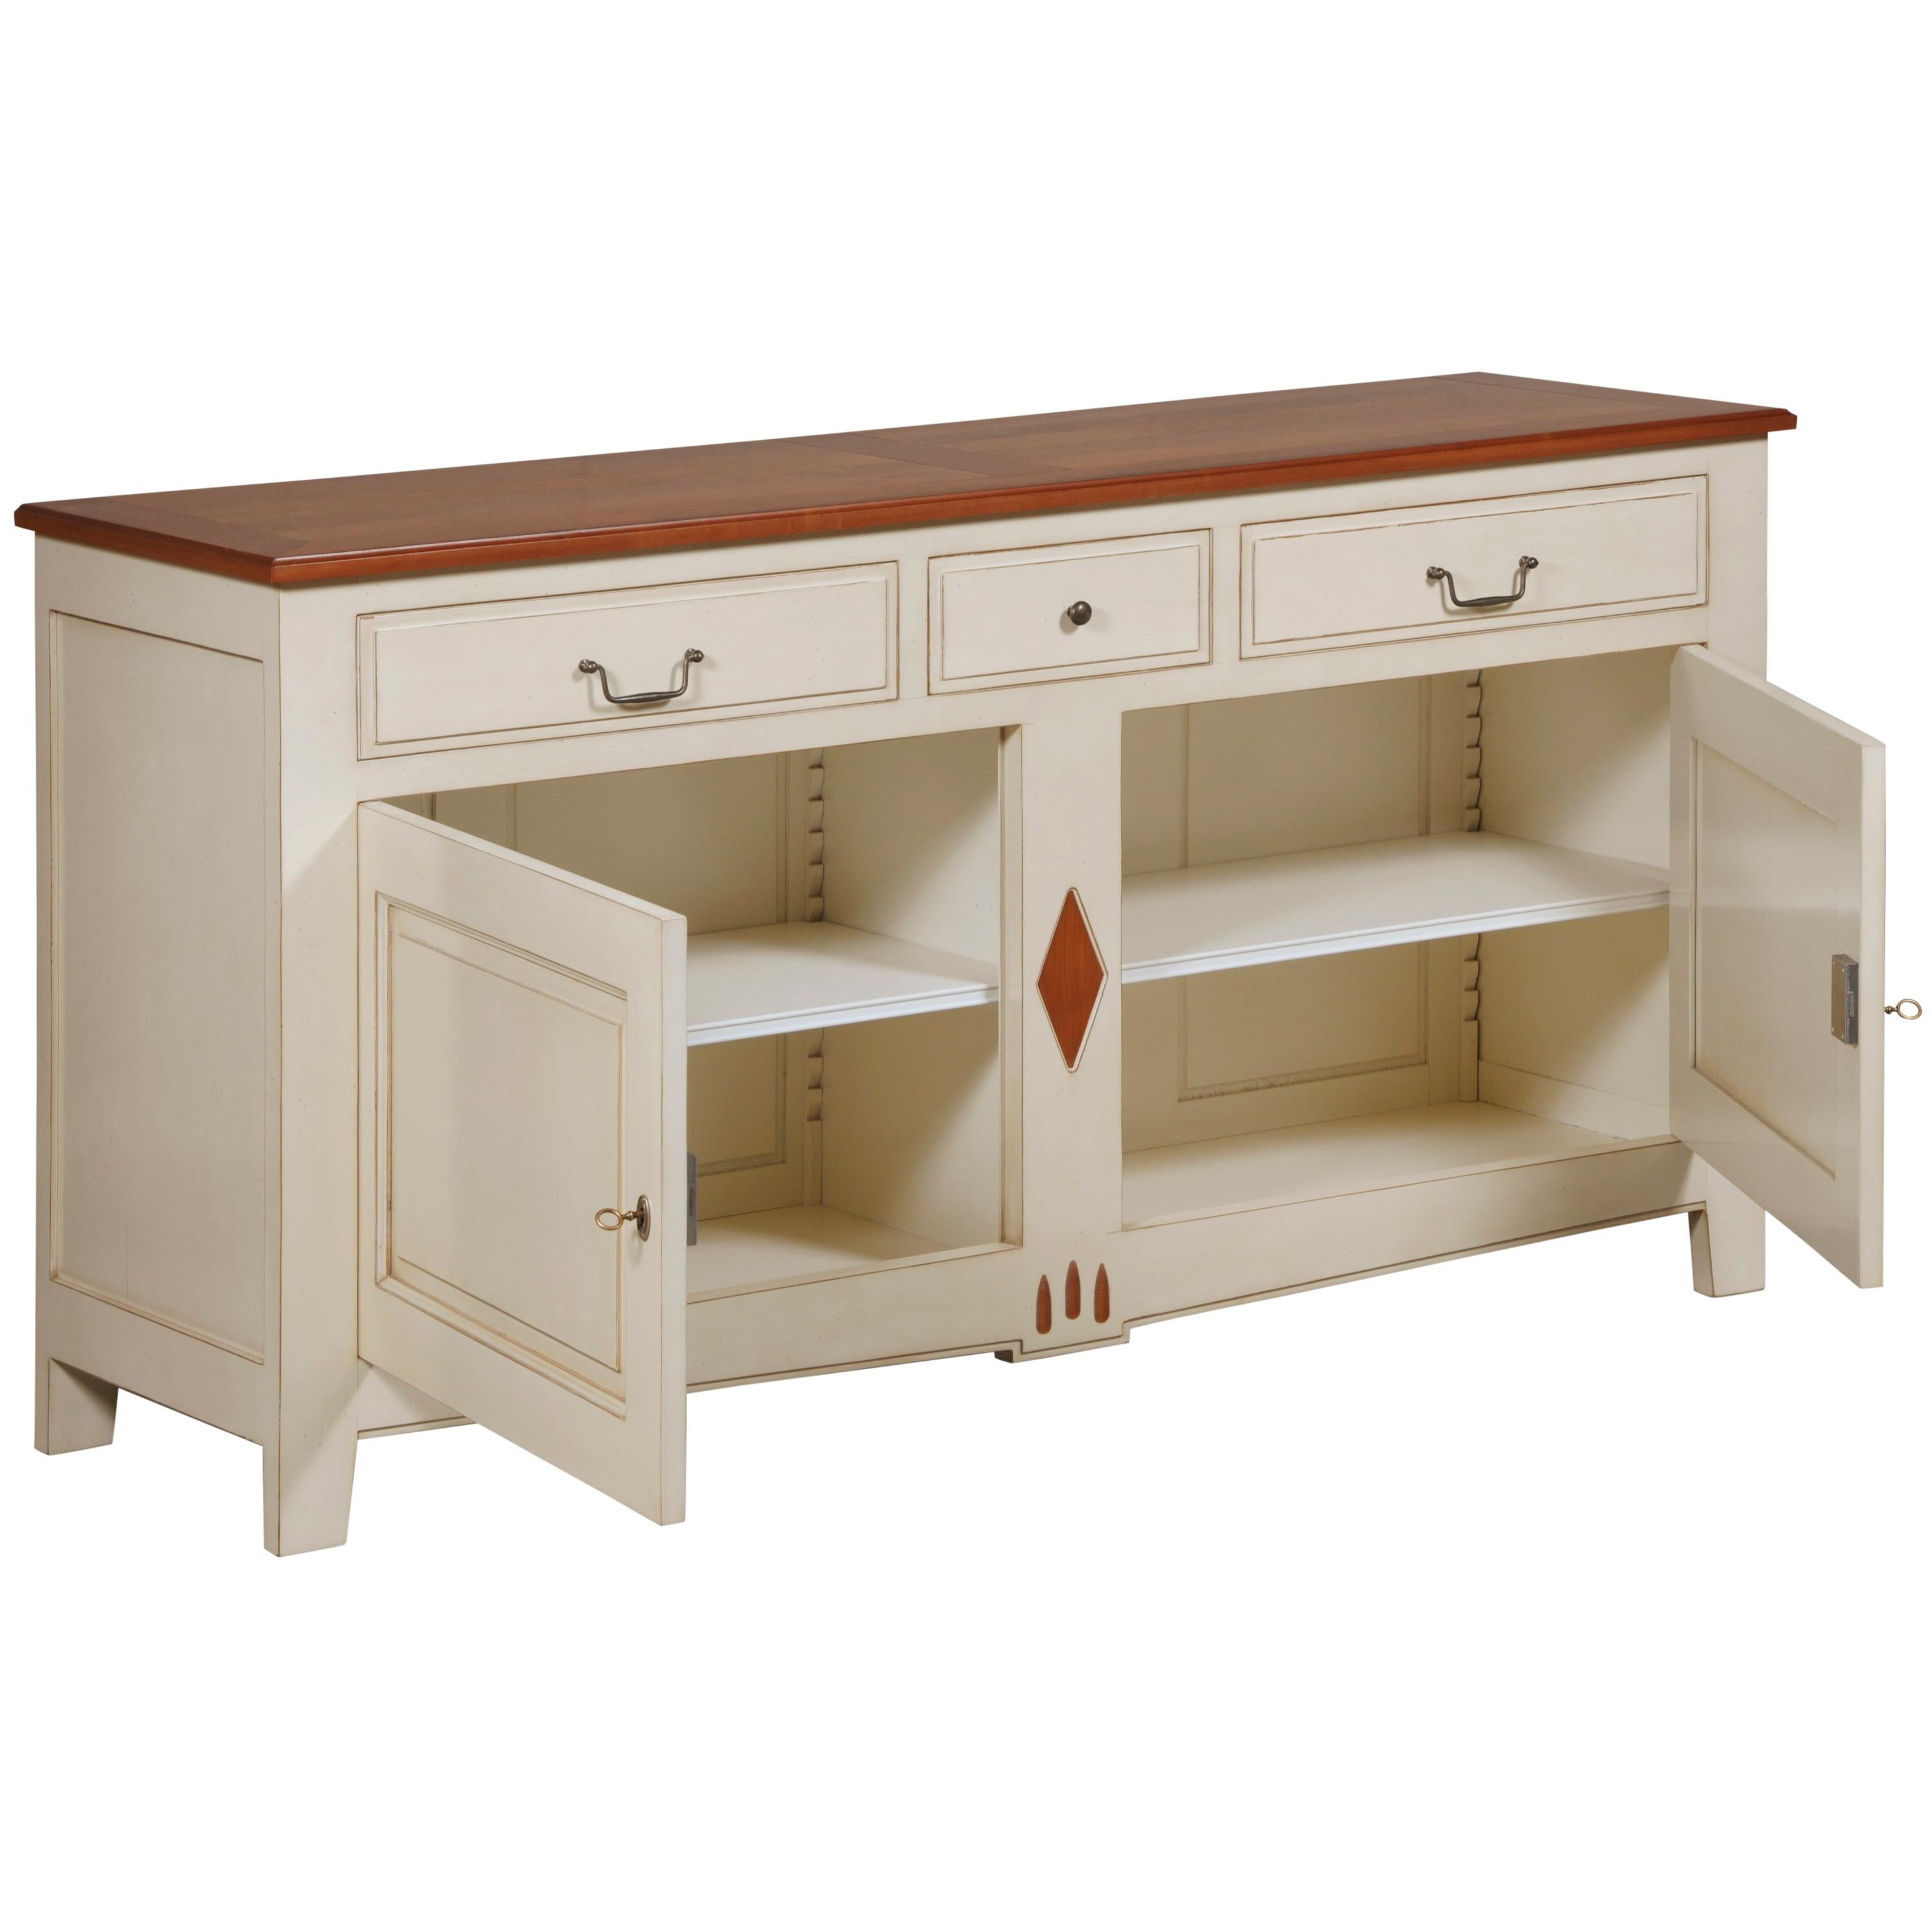 Neoclassical French 2 Doors Sideboard in Cherry with Charm, 100% Made in France For Sale